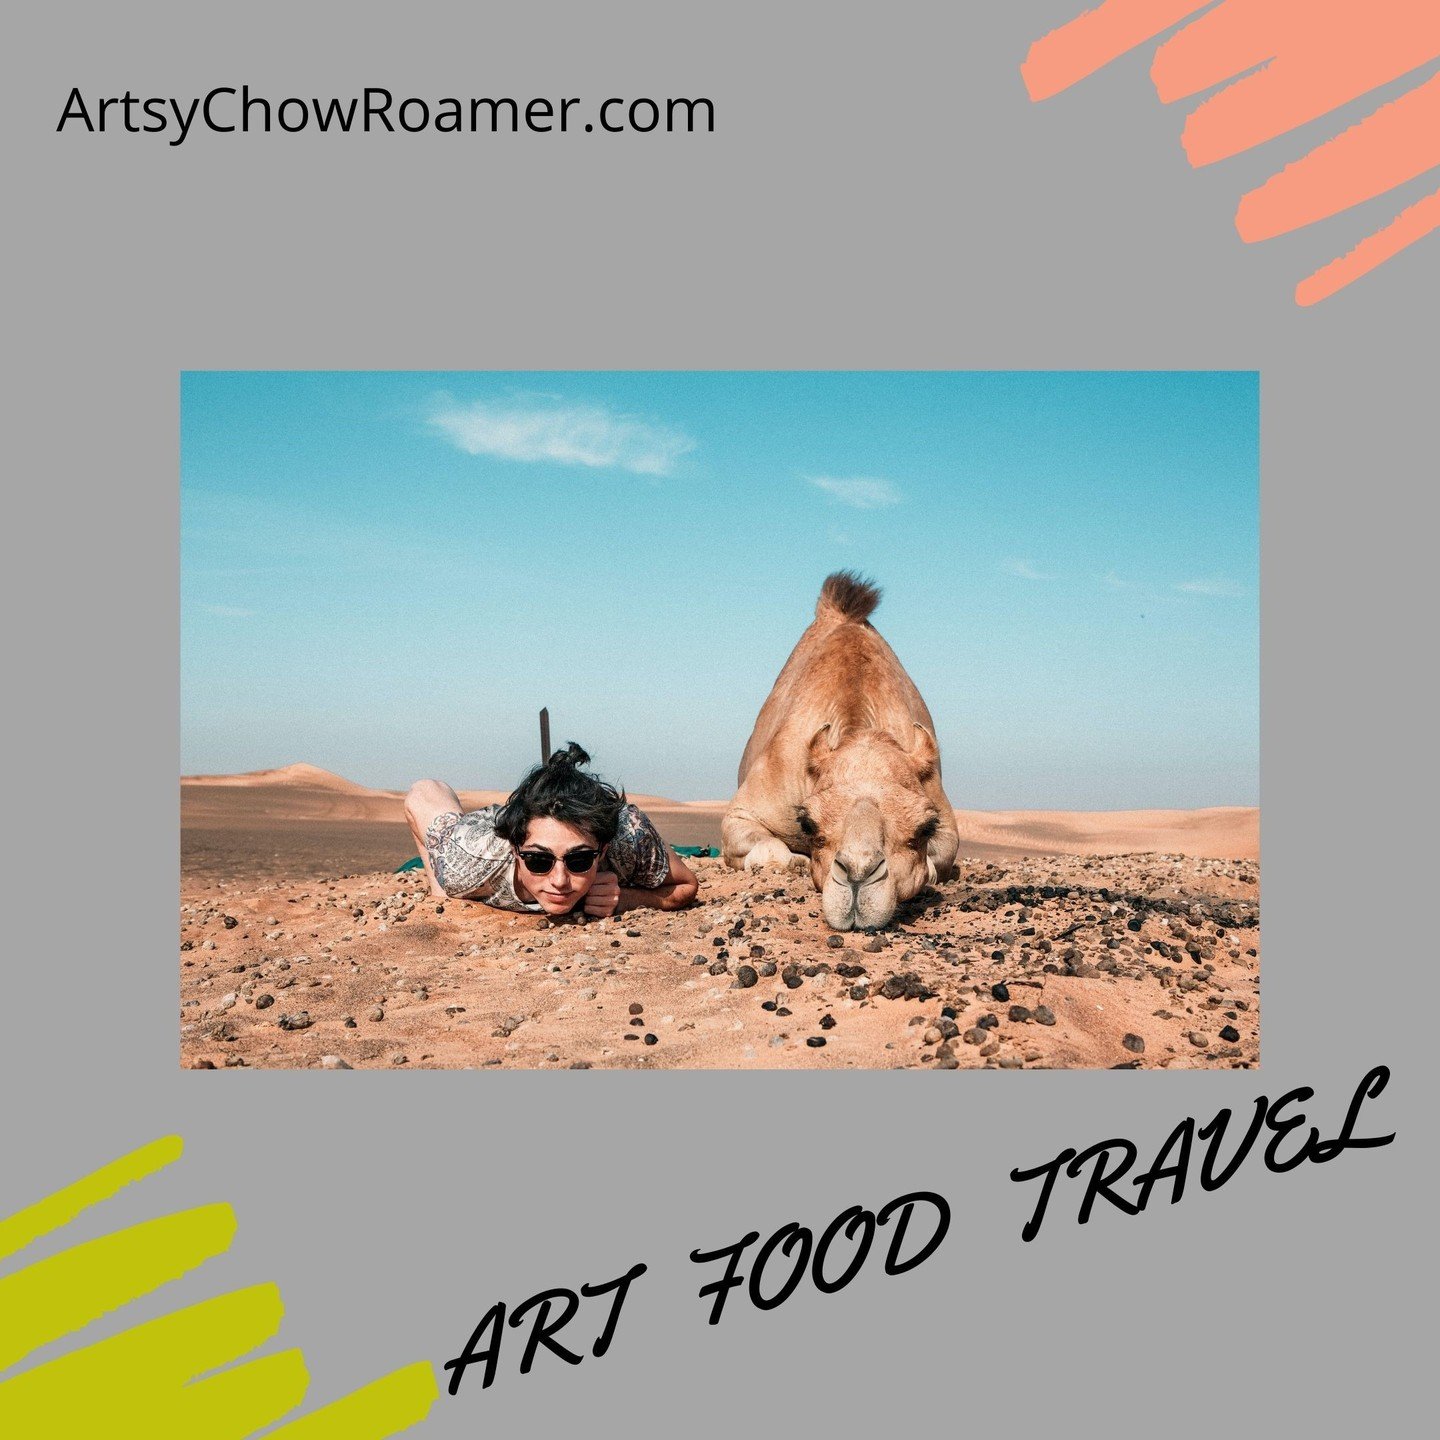 Ready for your next grand adventure? Join our curious tribe of foodies who love to explore and experience all things artsy...

#artsychowroamer
#thequirkytourist
#exploretheworld
#travel
#dametravelers
#shewhowanders
#sheisnotlost